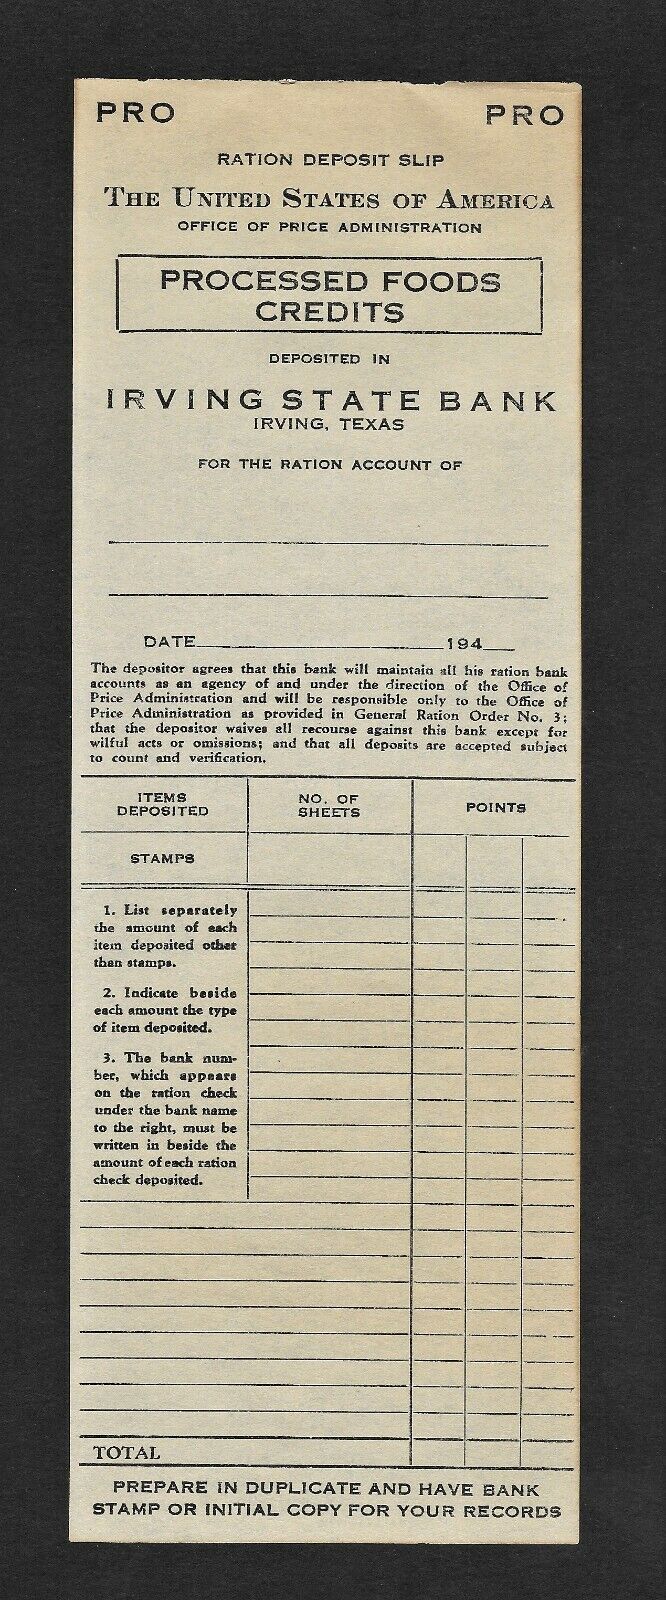 1940's Ration Deposit Slip for Processed Food Credits in Irving State Bank Texas